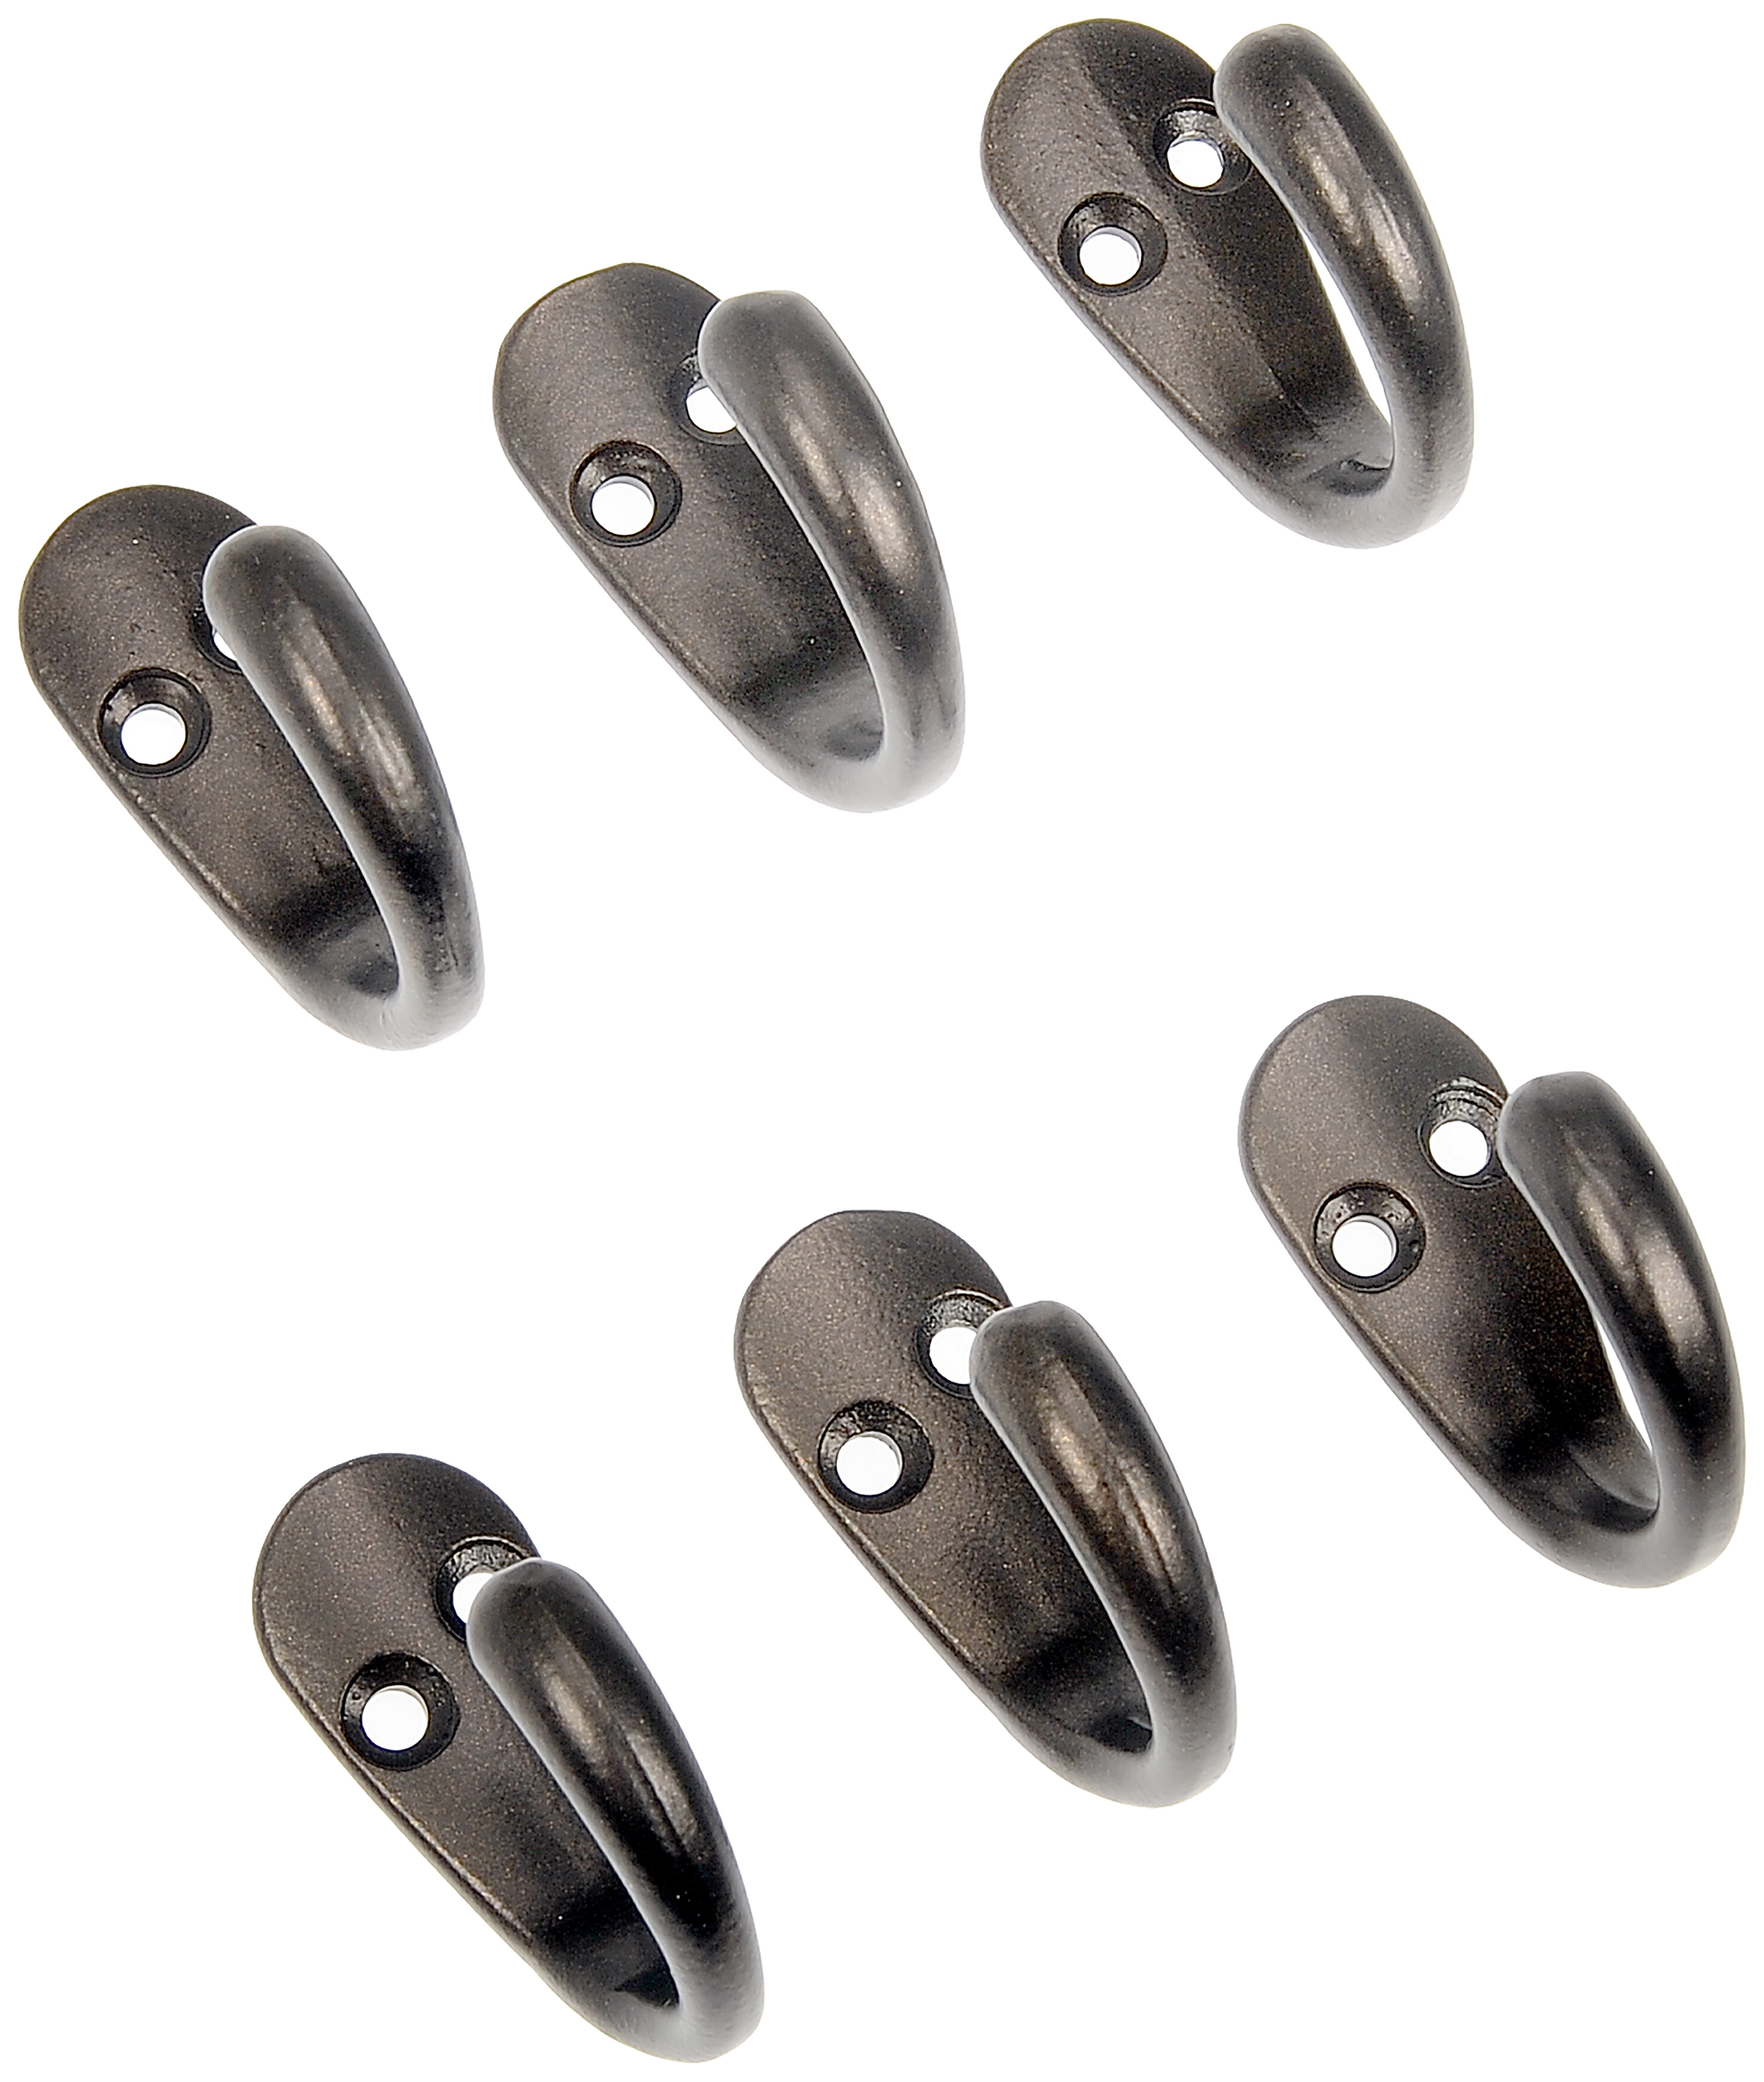 Mainstays, Single Oil-Rubbed Bronze Hooks, 6 Pack, Mounting Hardware Included, 10 lb Working Limit